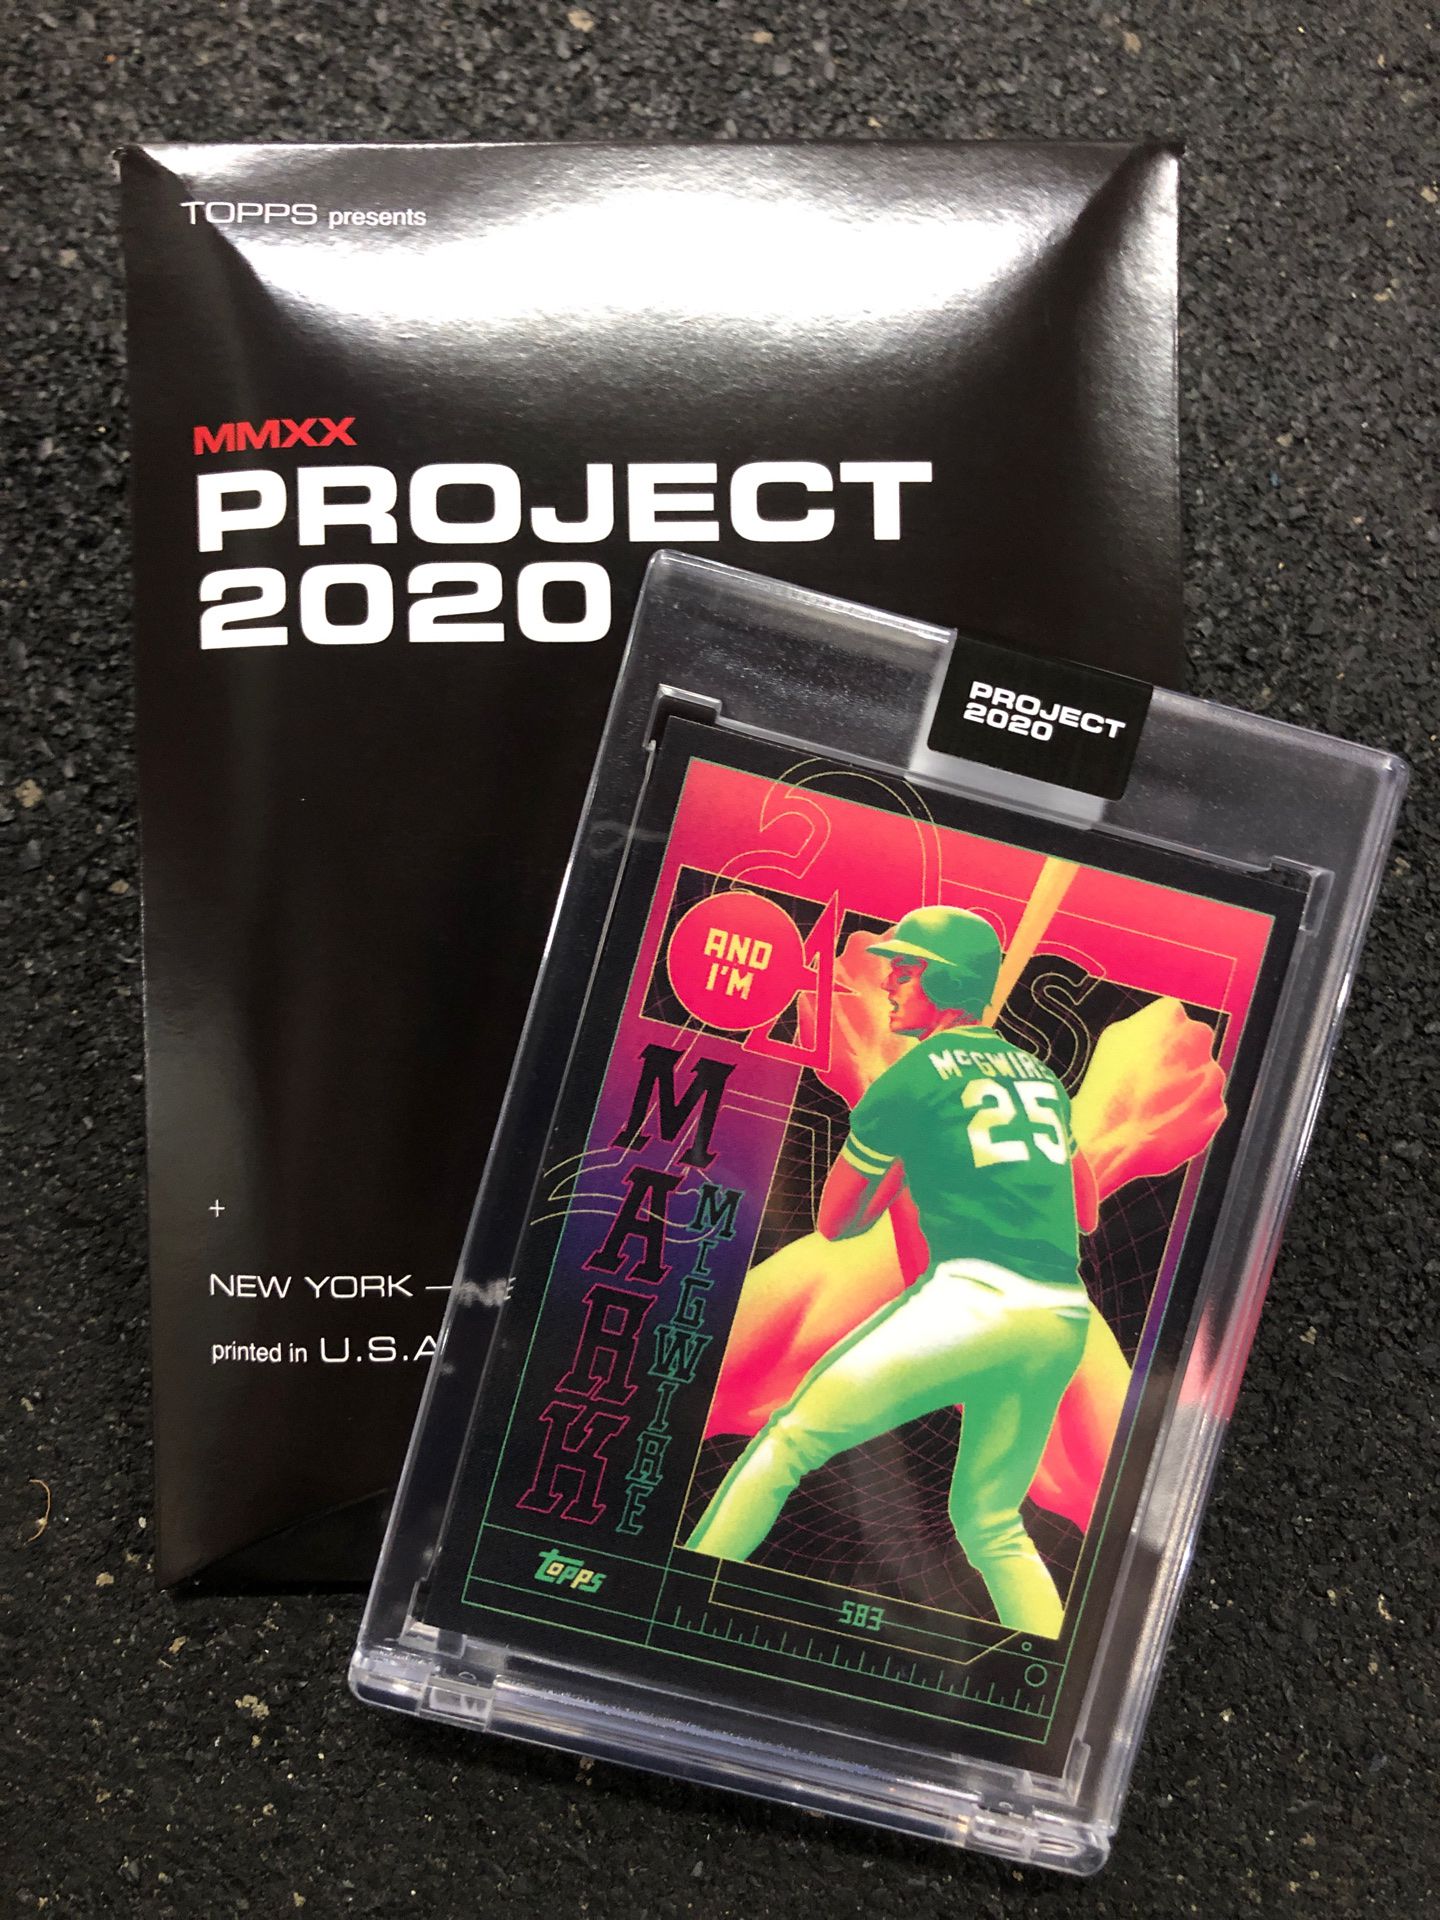 TOPPS Project 2020 Mark McGwire by Matt Taylor